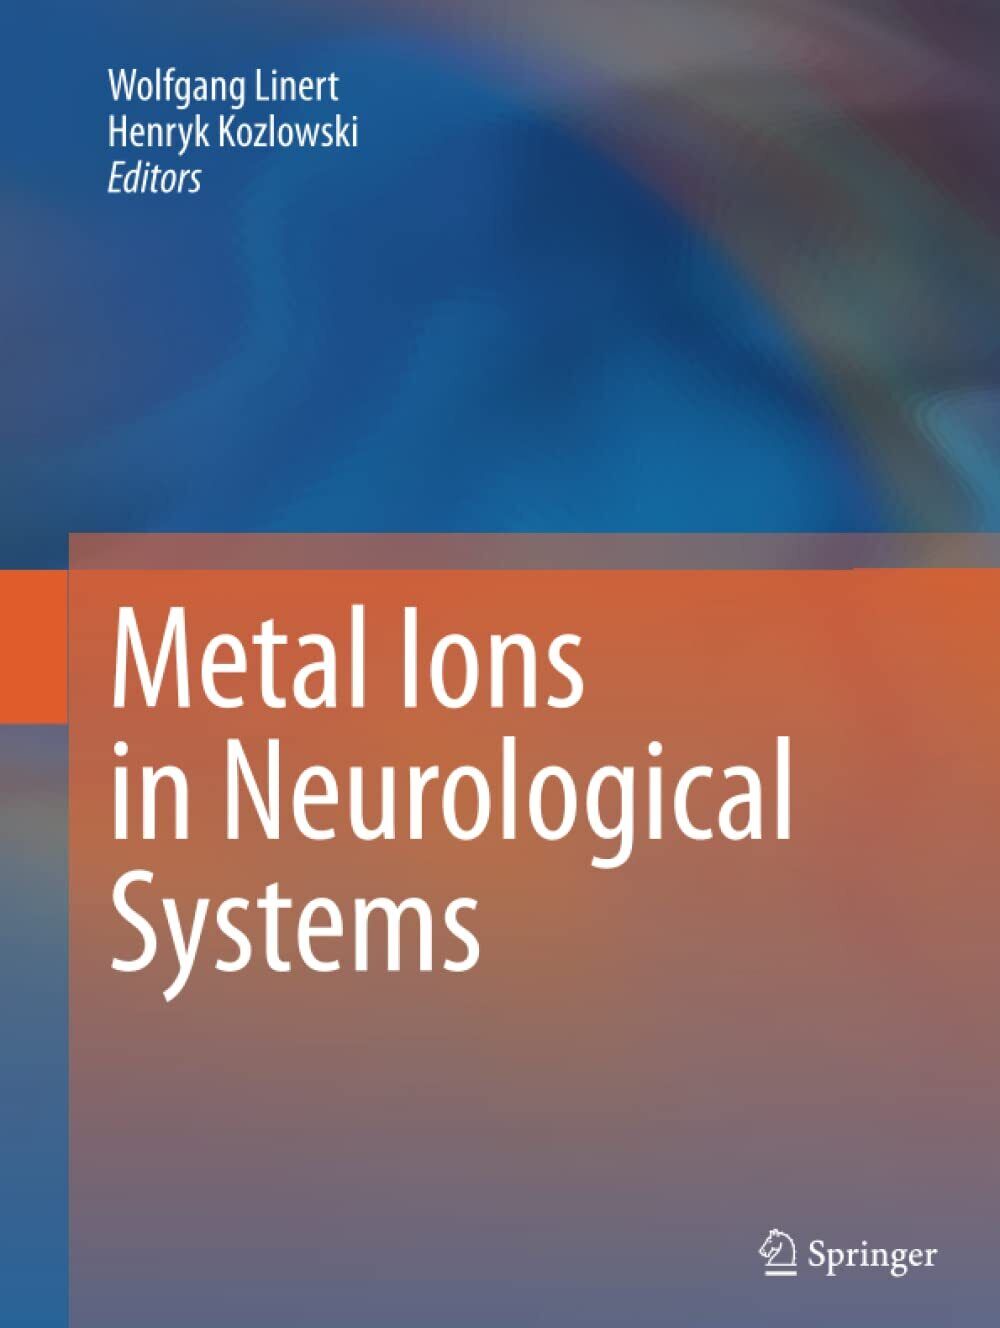 Metal Ions in Neurological Systems - Wolfgang Linert - Springer, 2014